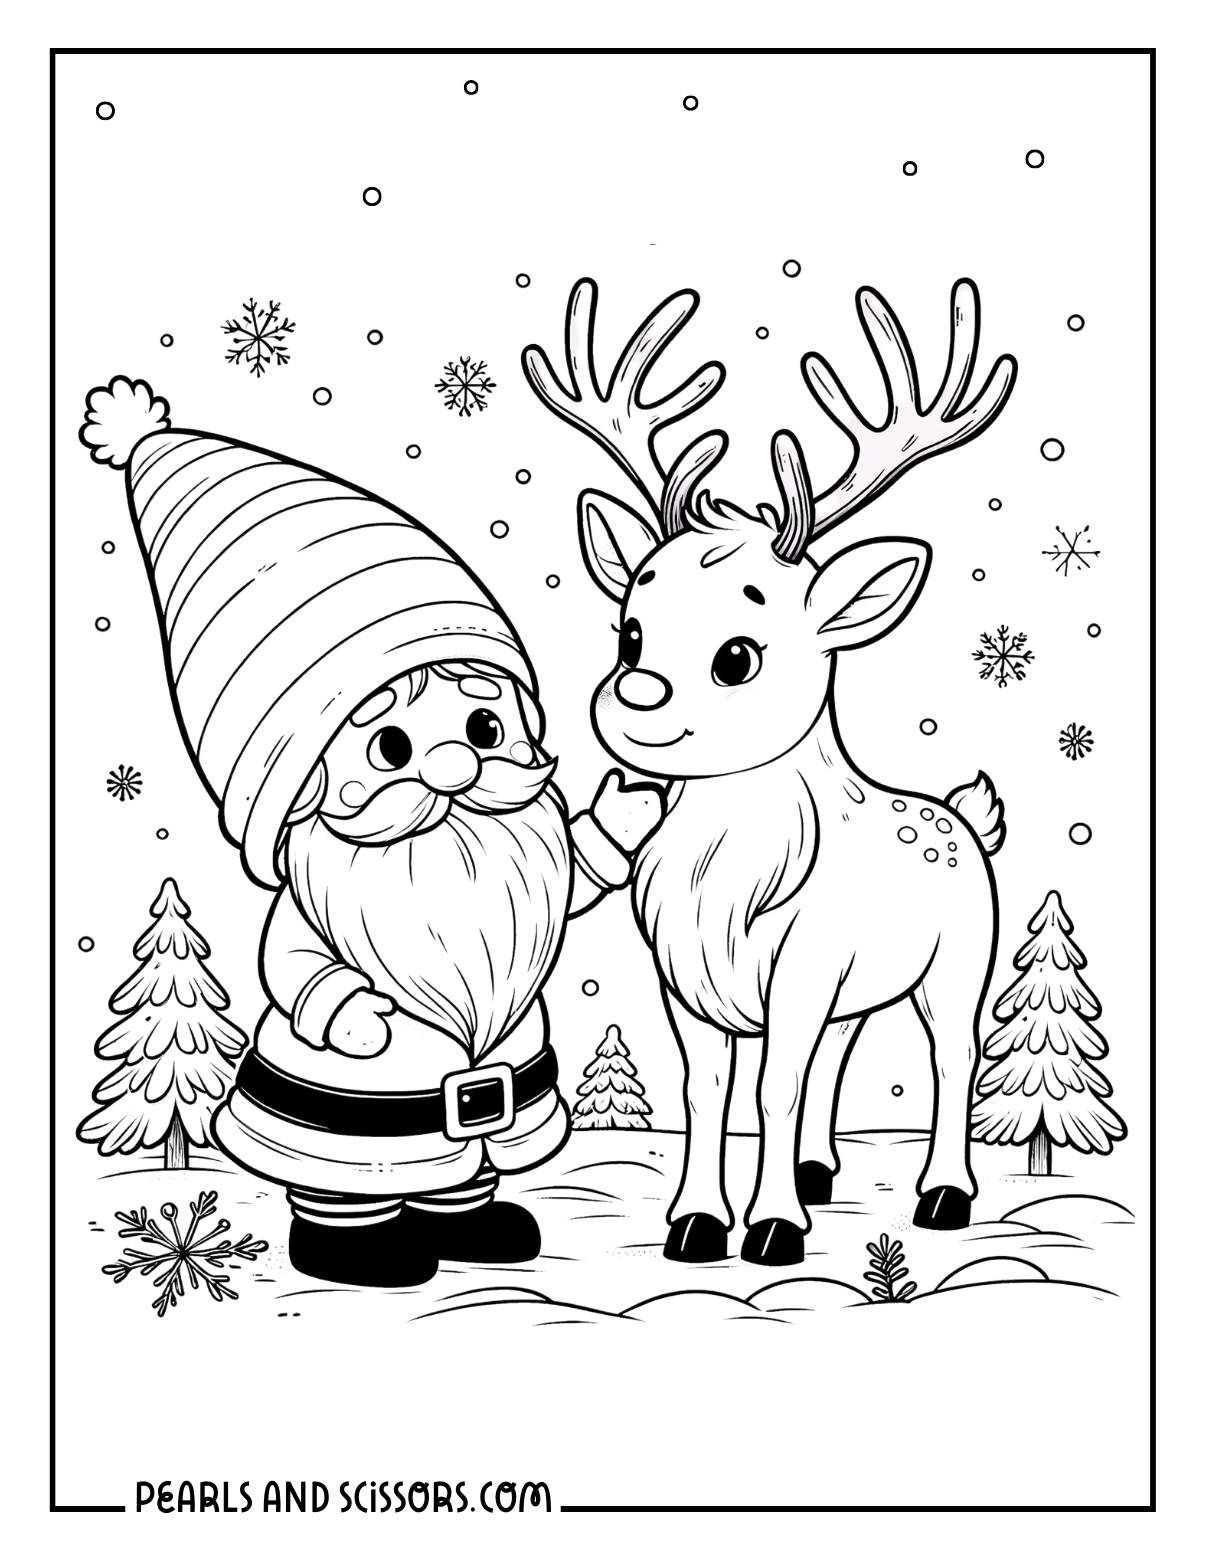 Santa Claus gnome and a Rudolf the reindeer coloring page.